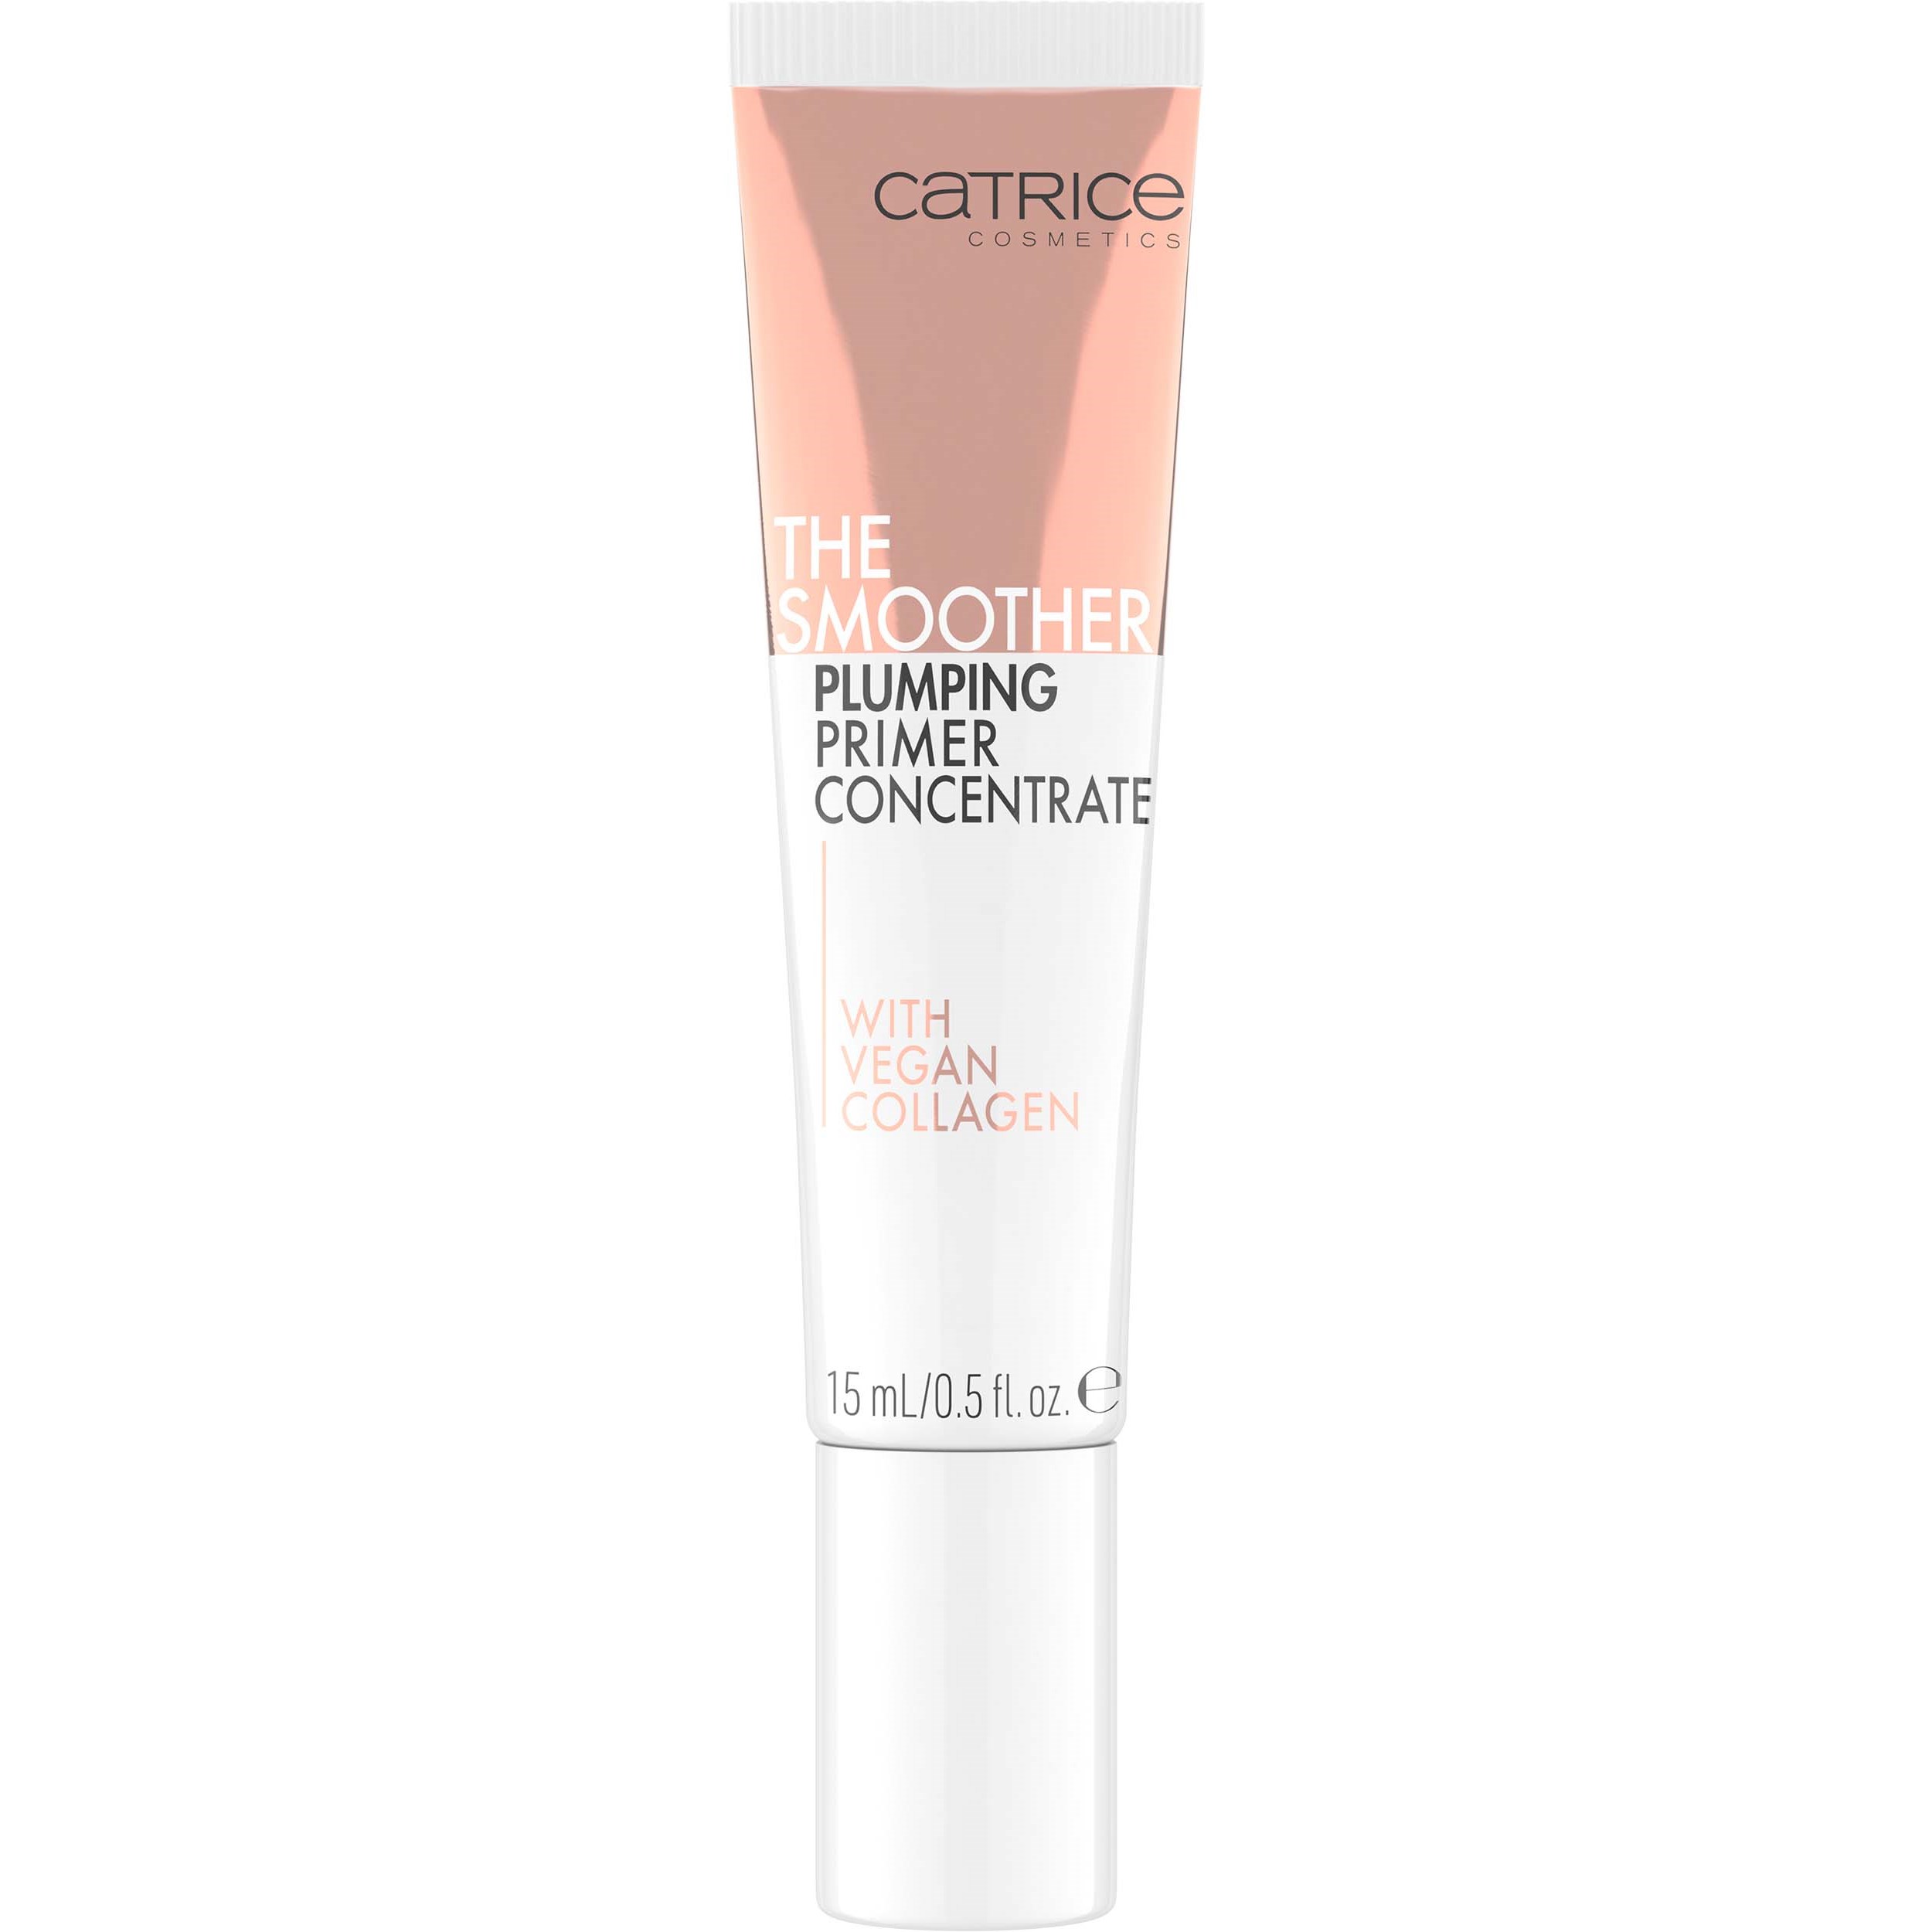 Läs mer om Catrice The Smoother Plumping Primer Concentrate